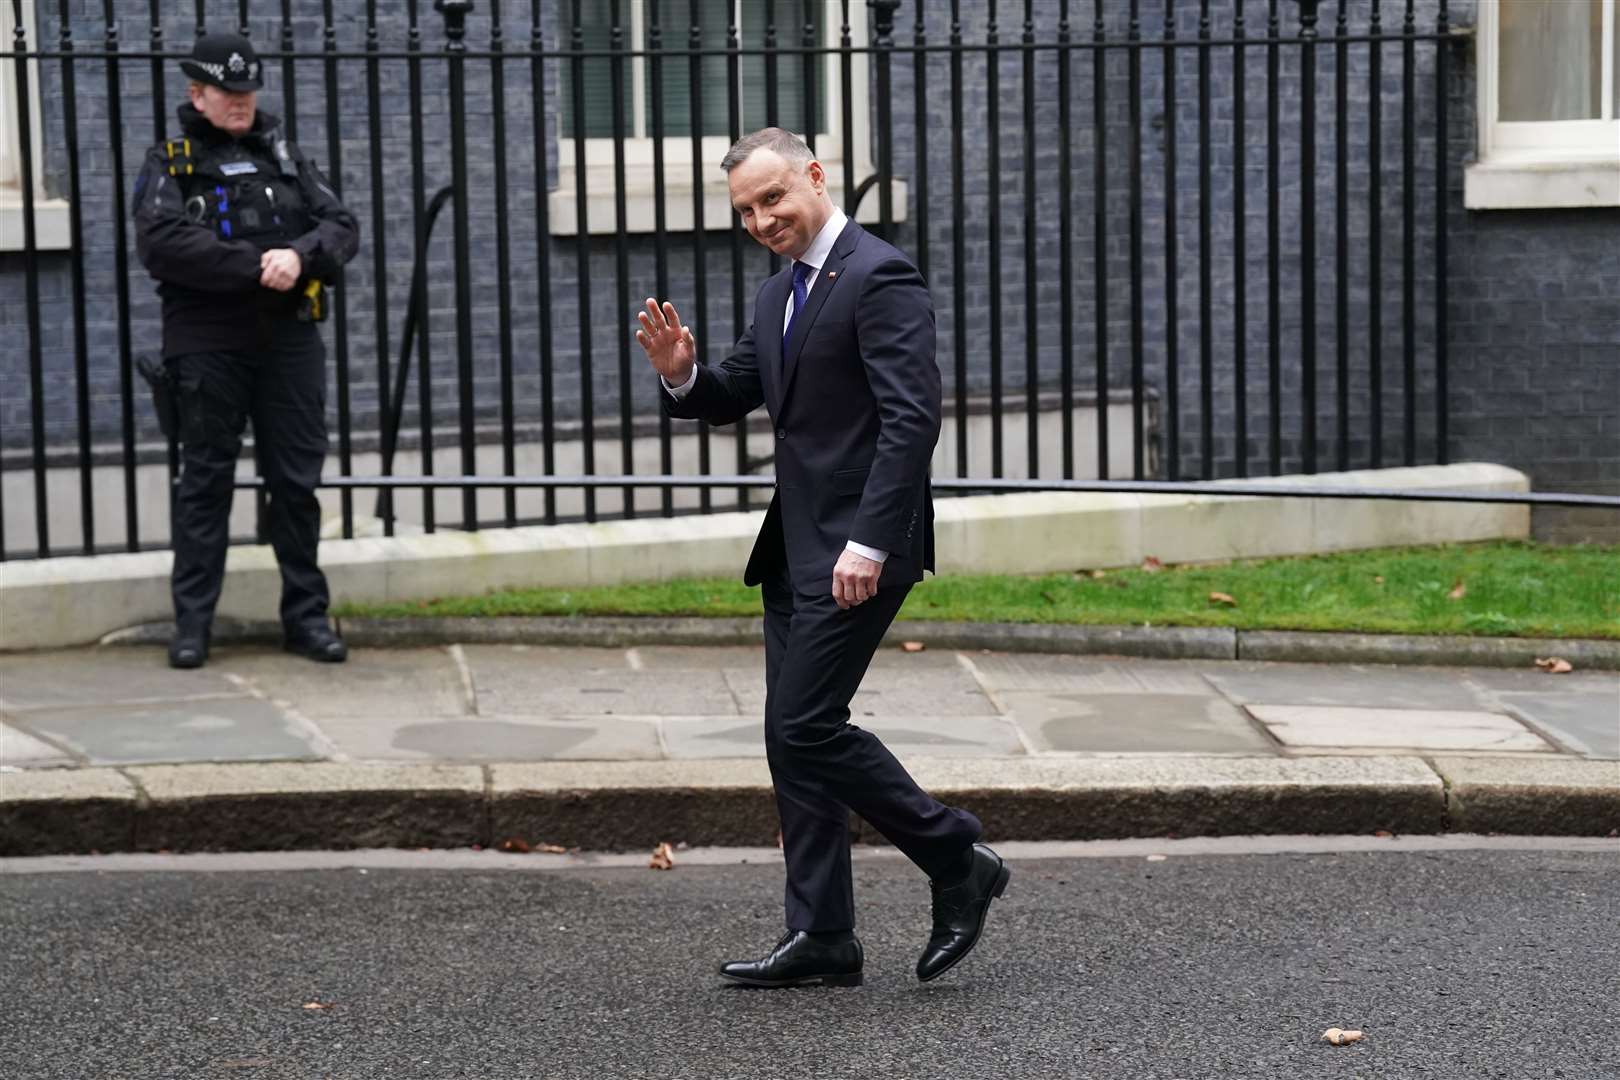 Mr Duda arrives at 10 Downing Street (Kirsty O’Connor/PA)